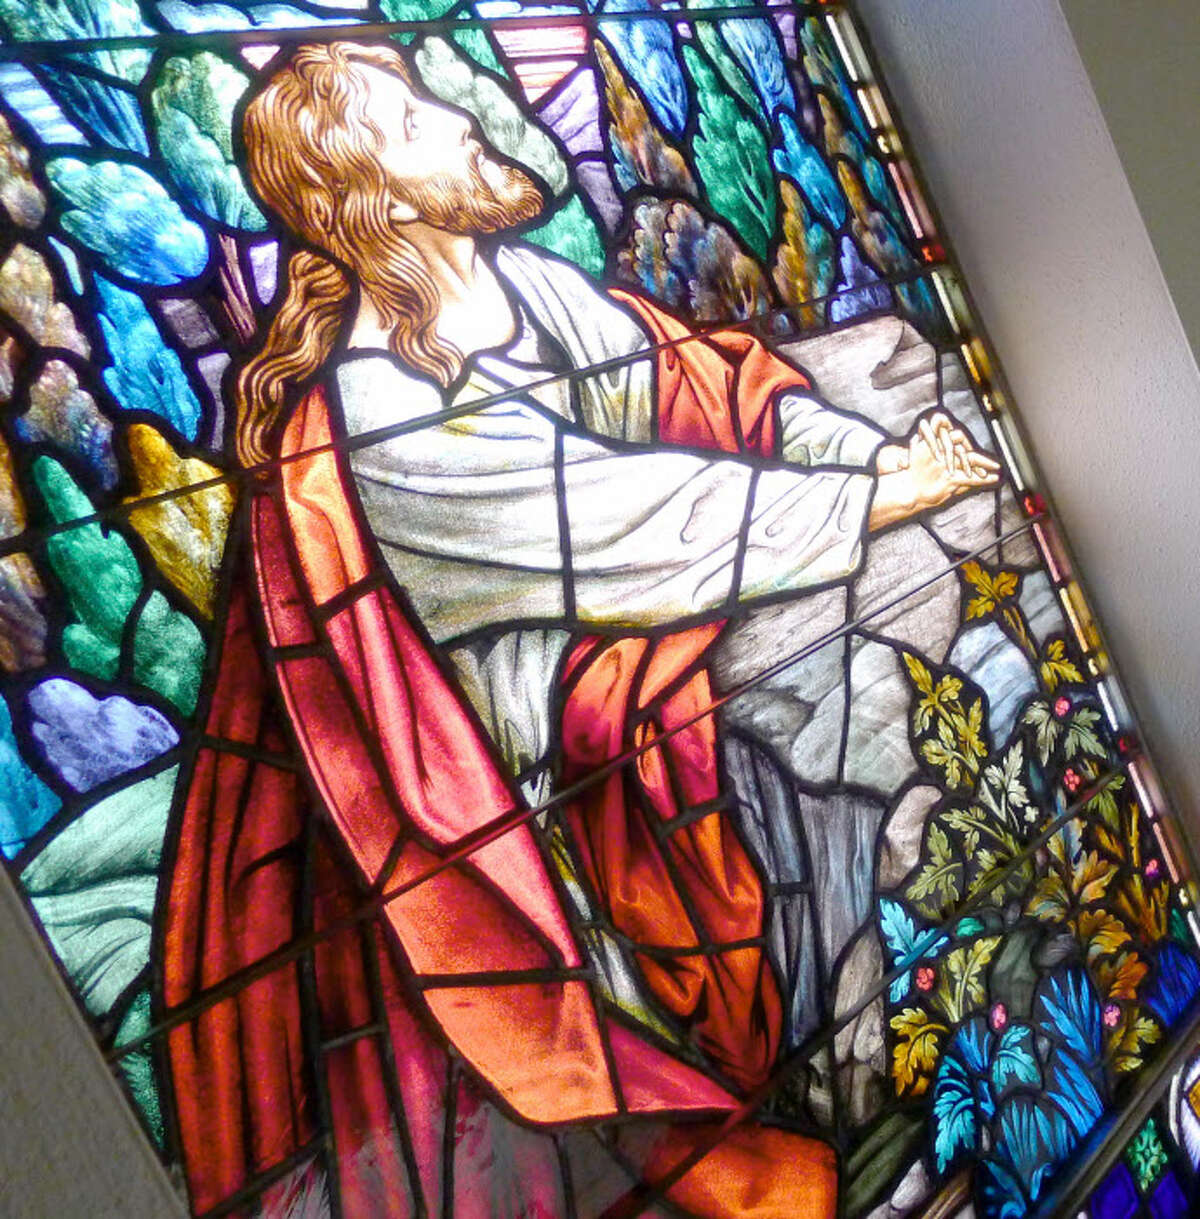 A stained-glass window at Bethany Reformed Church in Albany, N.Y. (Michael P. Farrell/Times Union) ORG XMIT: MER2016021716431932